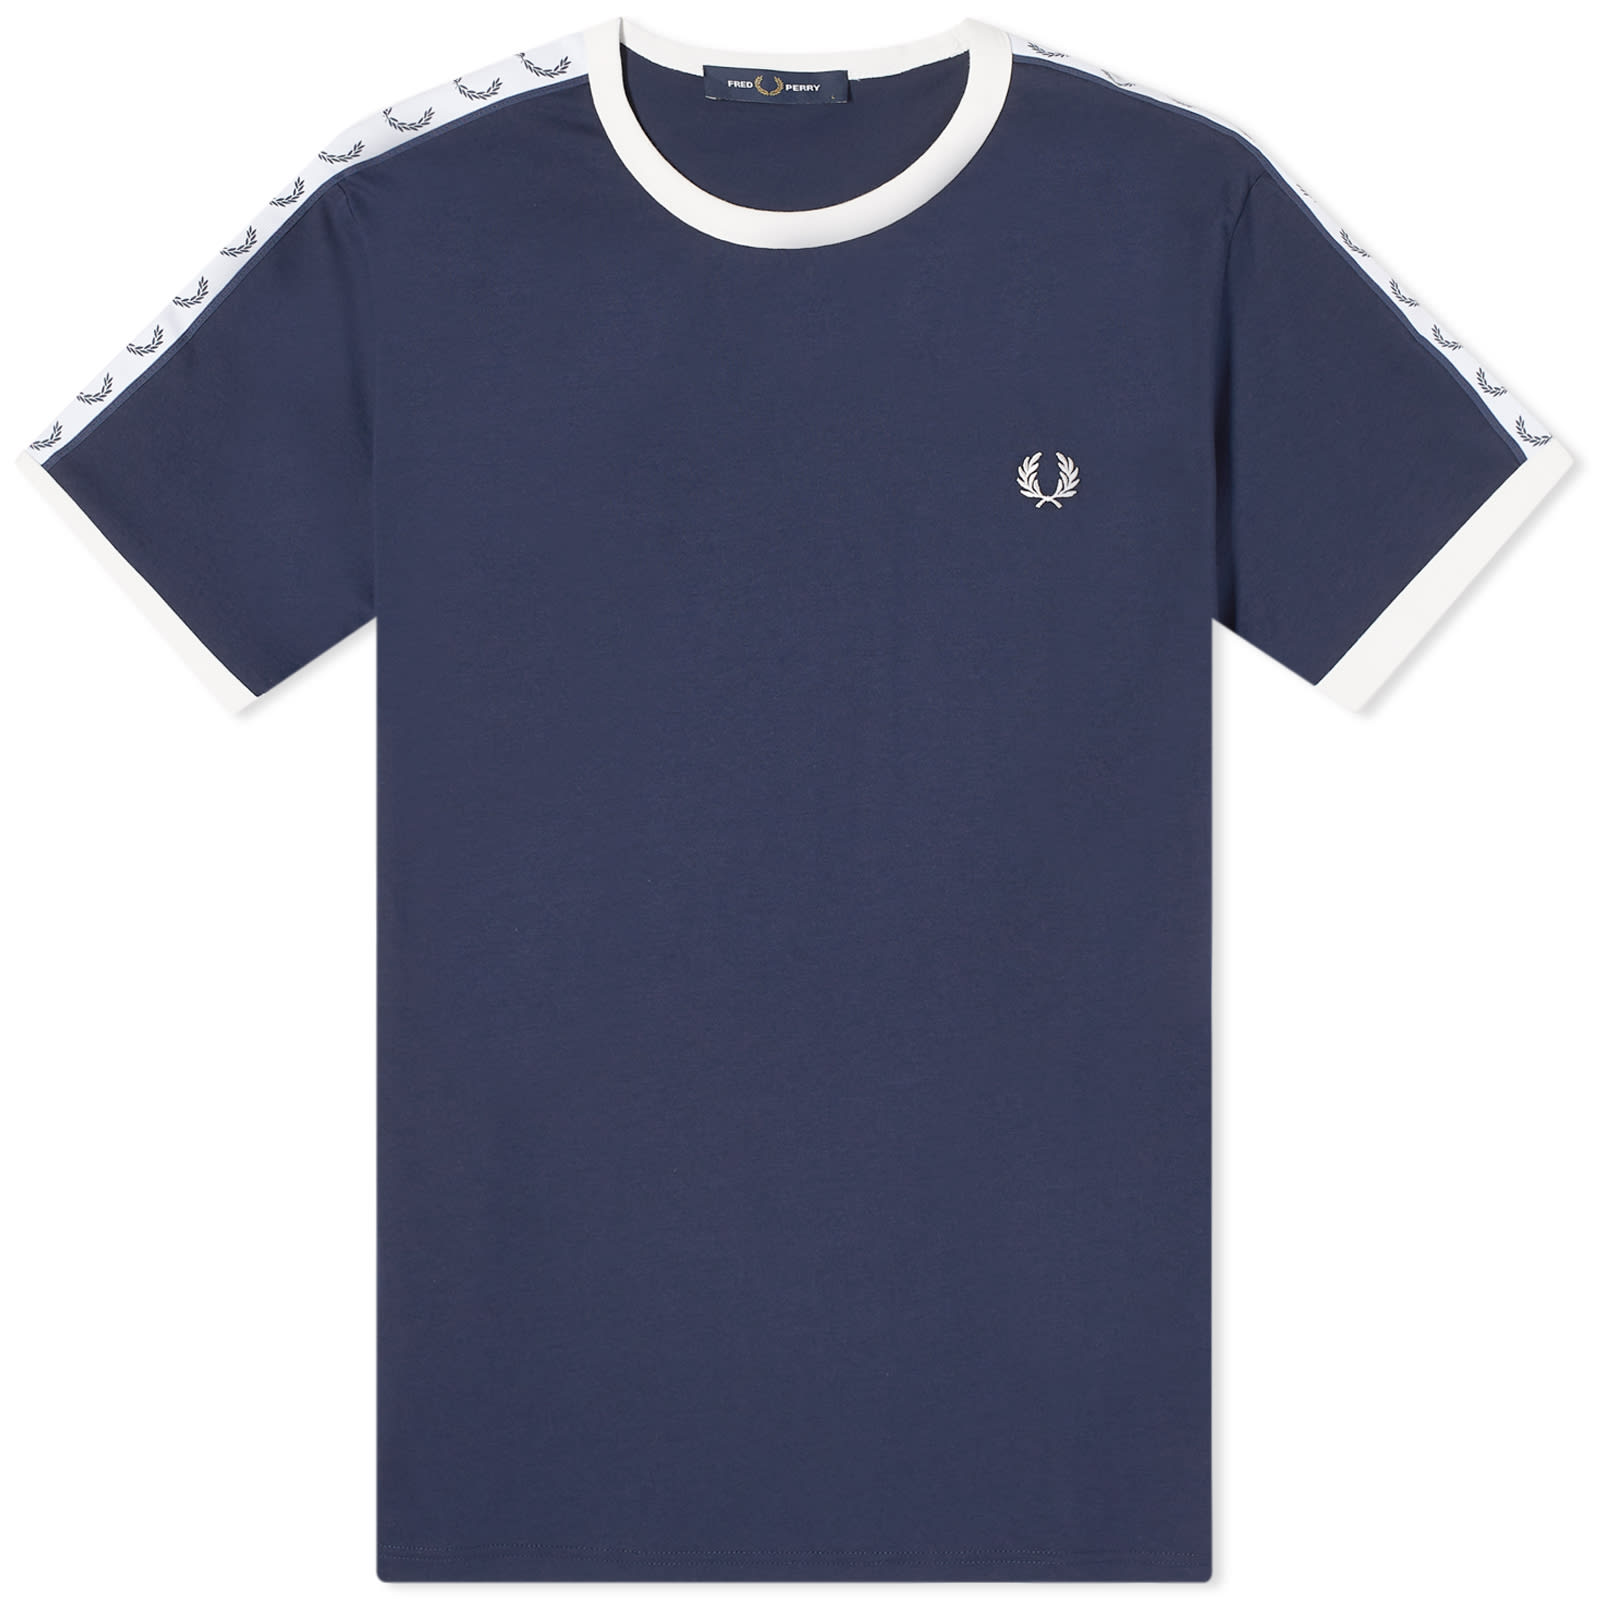 Футболка Fred Perry Taped Ringer, синий футболка fred perry taped ringer tee